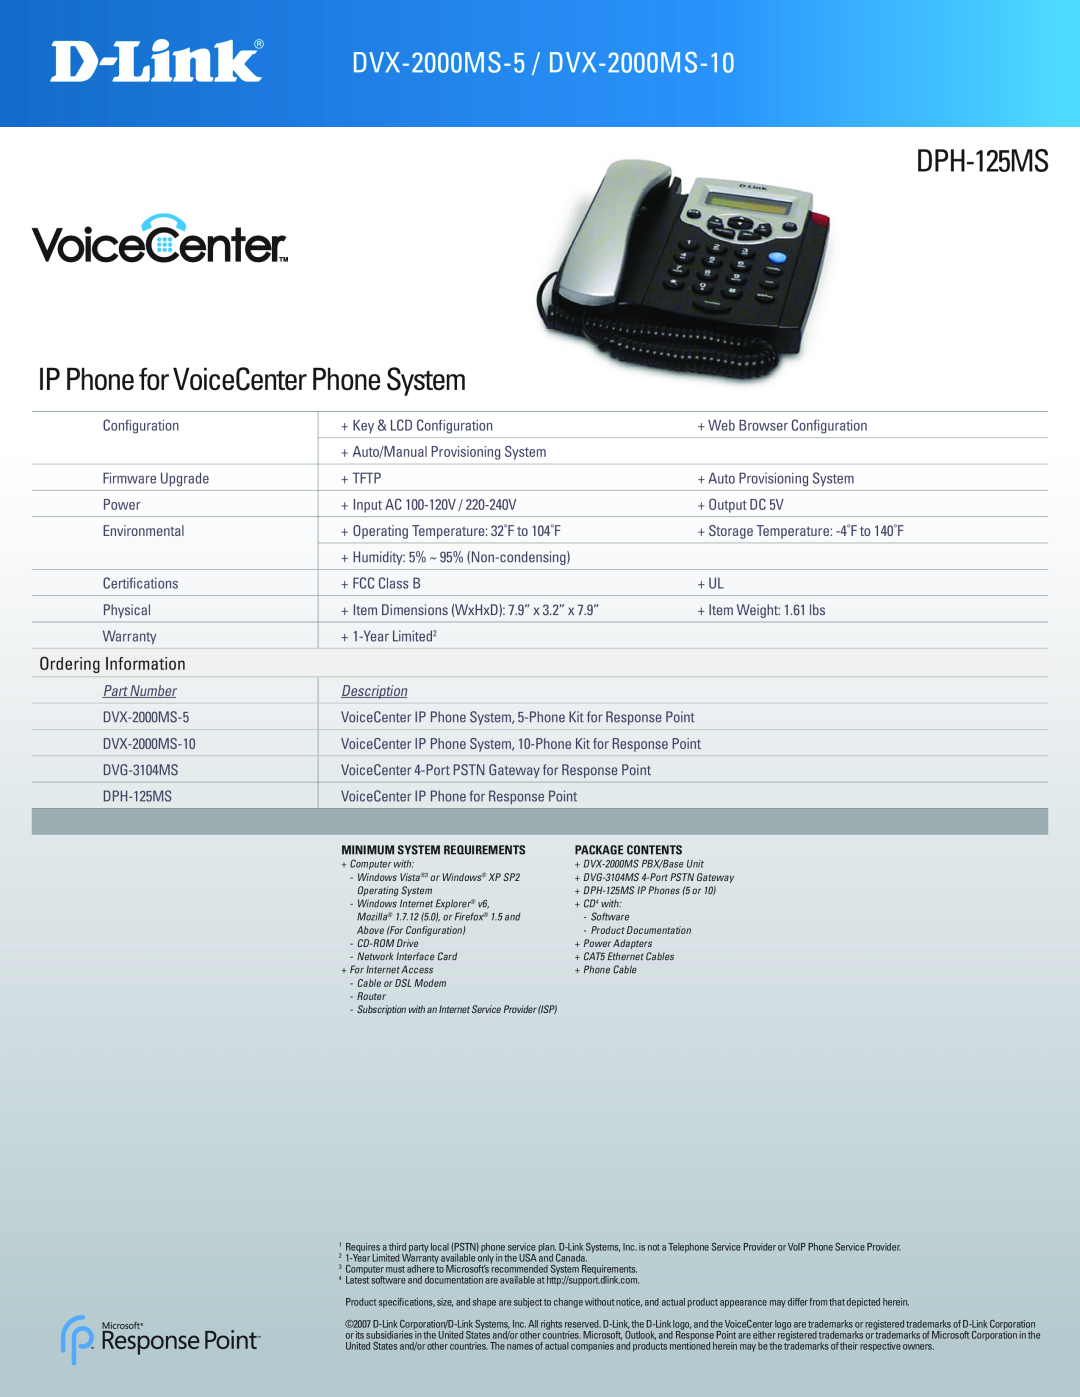 D-Link DPH-125MS IP Phone for VoiceCenter Phone System, DVX-2000MS-5 / DVX-2000MS-10, Ordering Information, Part Number 